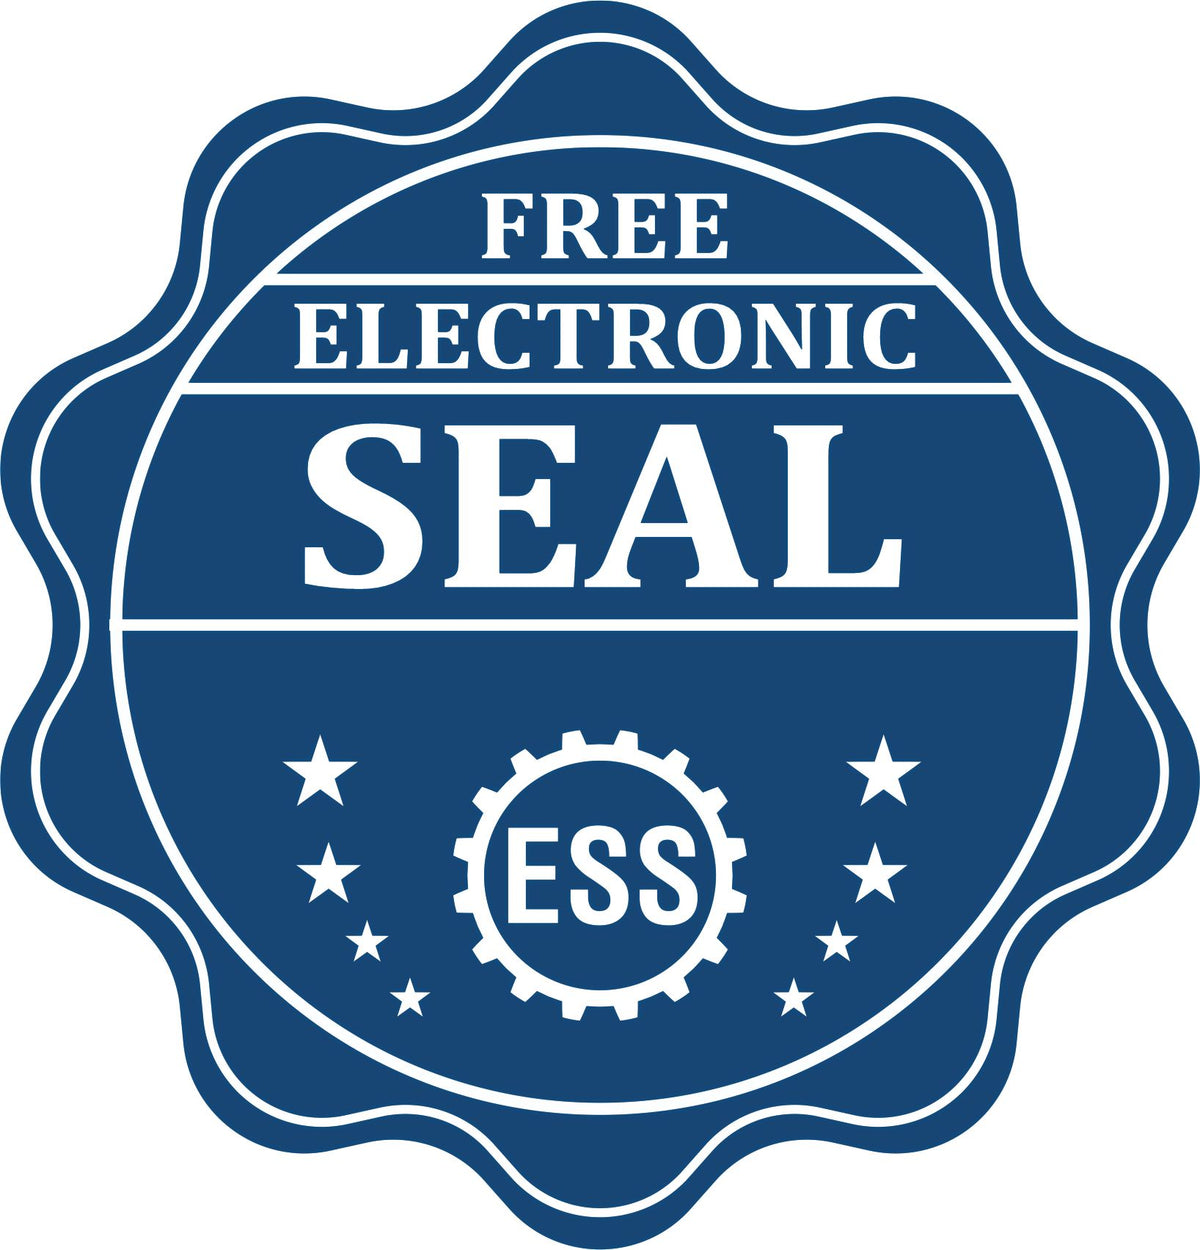 A badge showing a free electronic seal for the Soft Alabama Professional Engineer Seal with stars and the ESS gear on the emblem.